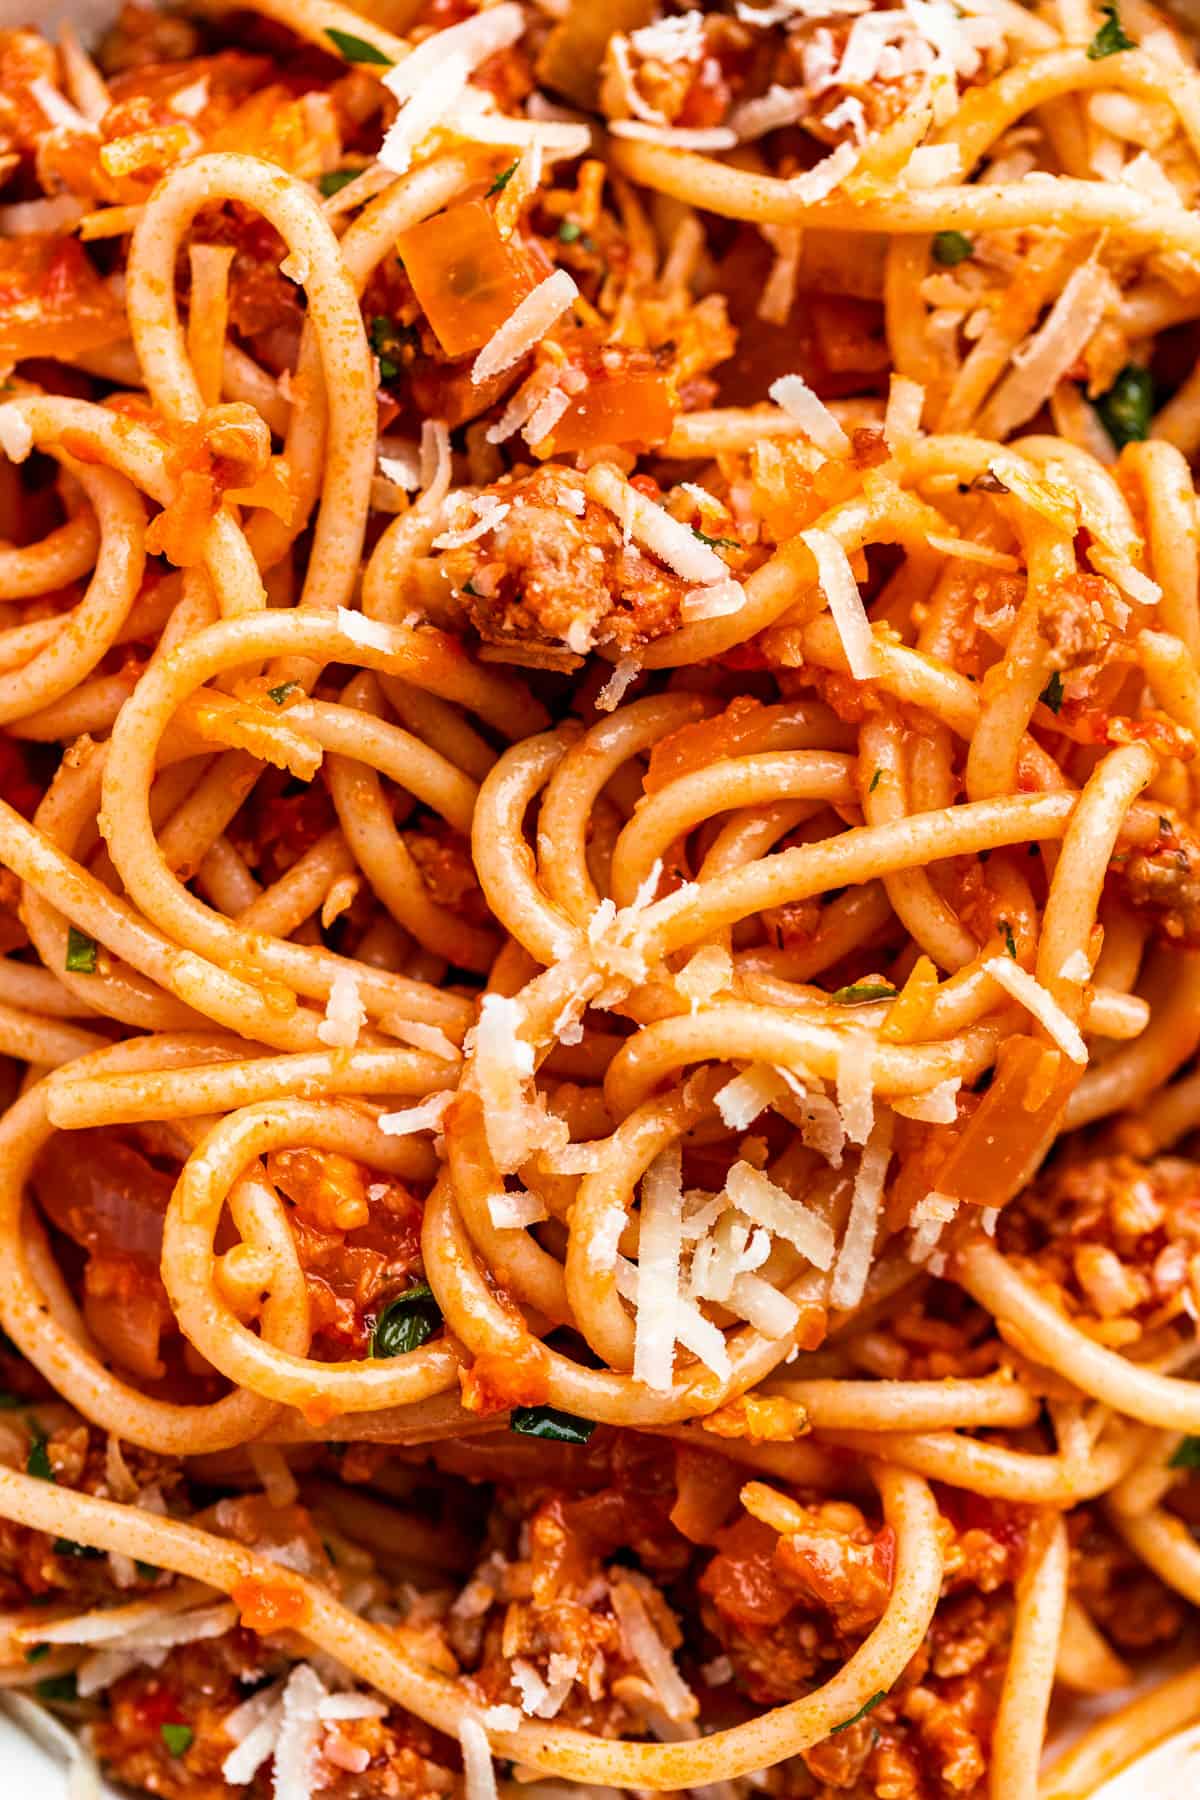 Macro close view of spaghetti tossed with spaghetti sauce and sprinkled with parmesan.